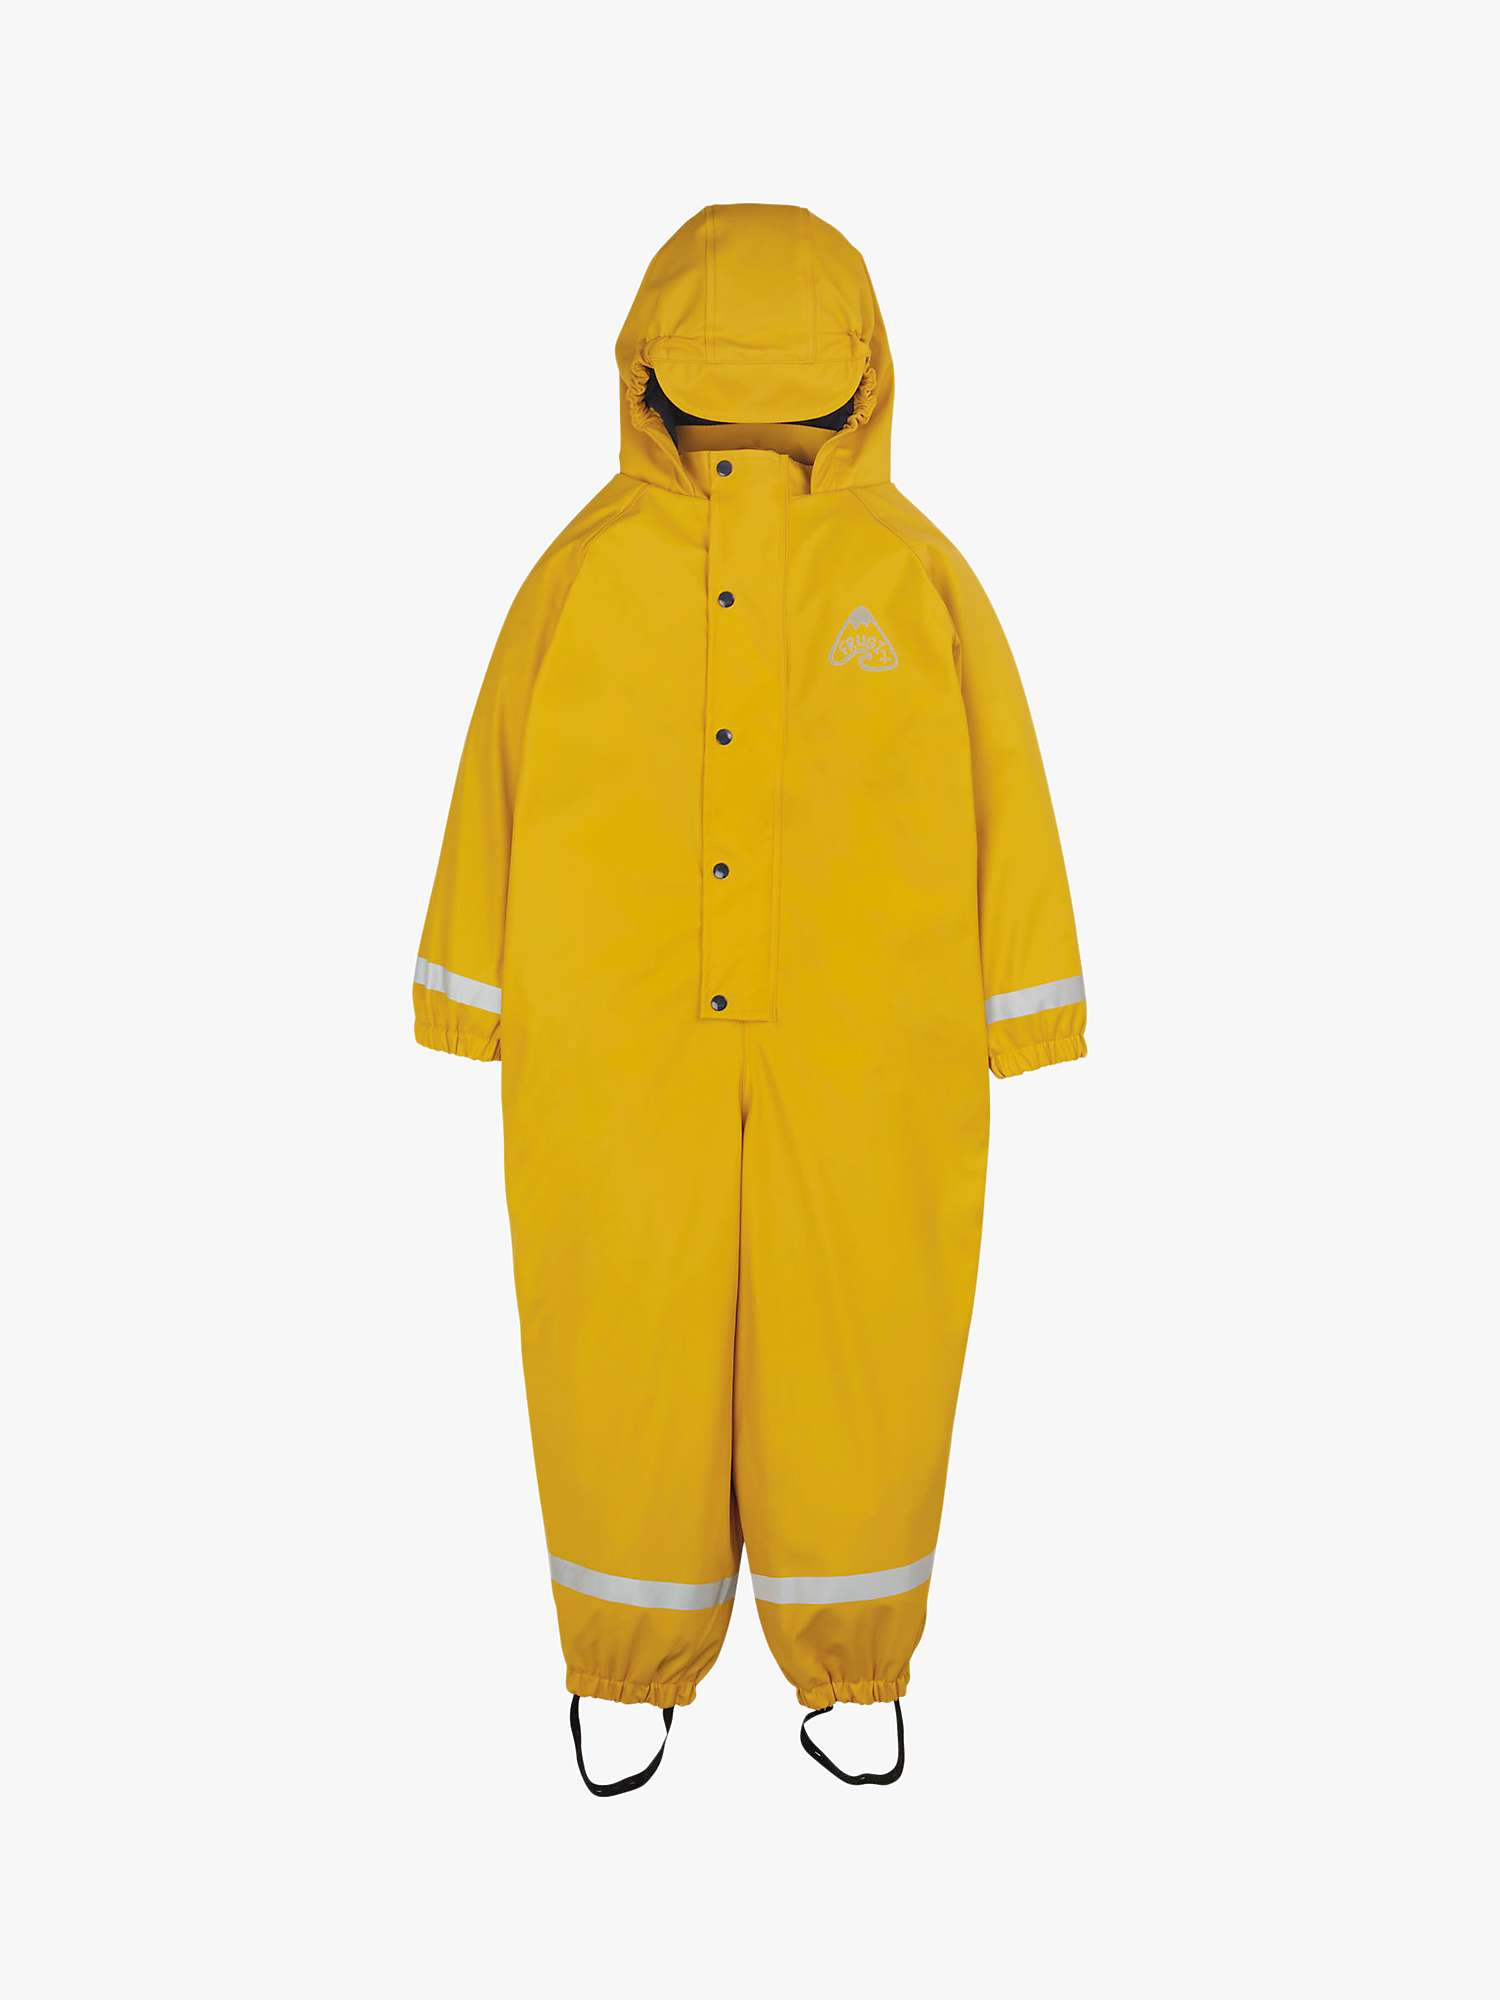 Buy Frugi Kids' Puddle Buster Waterproof All in One, Bumblebee Online at johnlewis.com